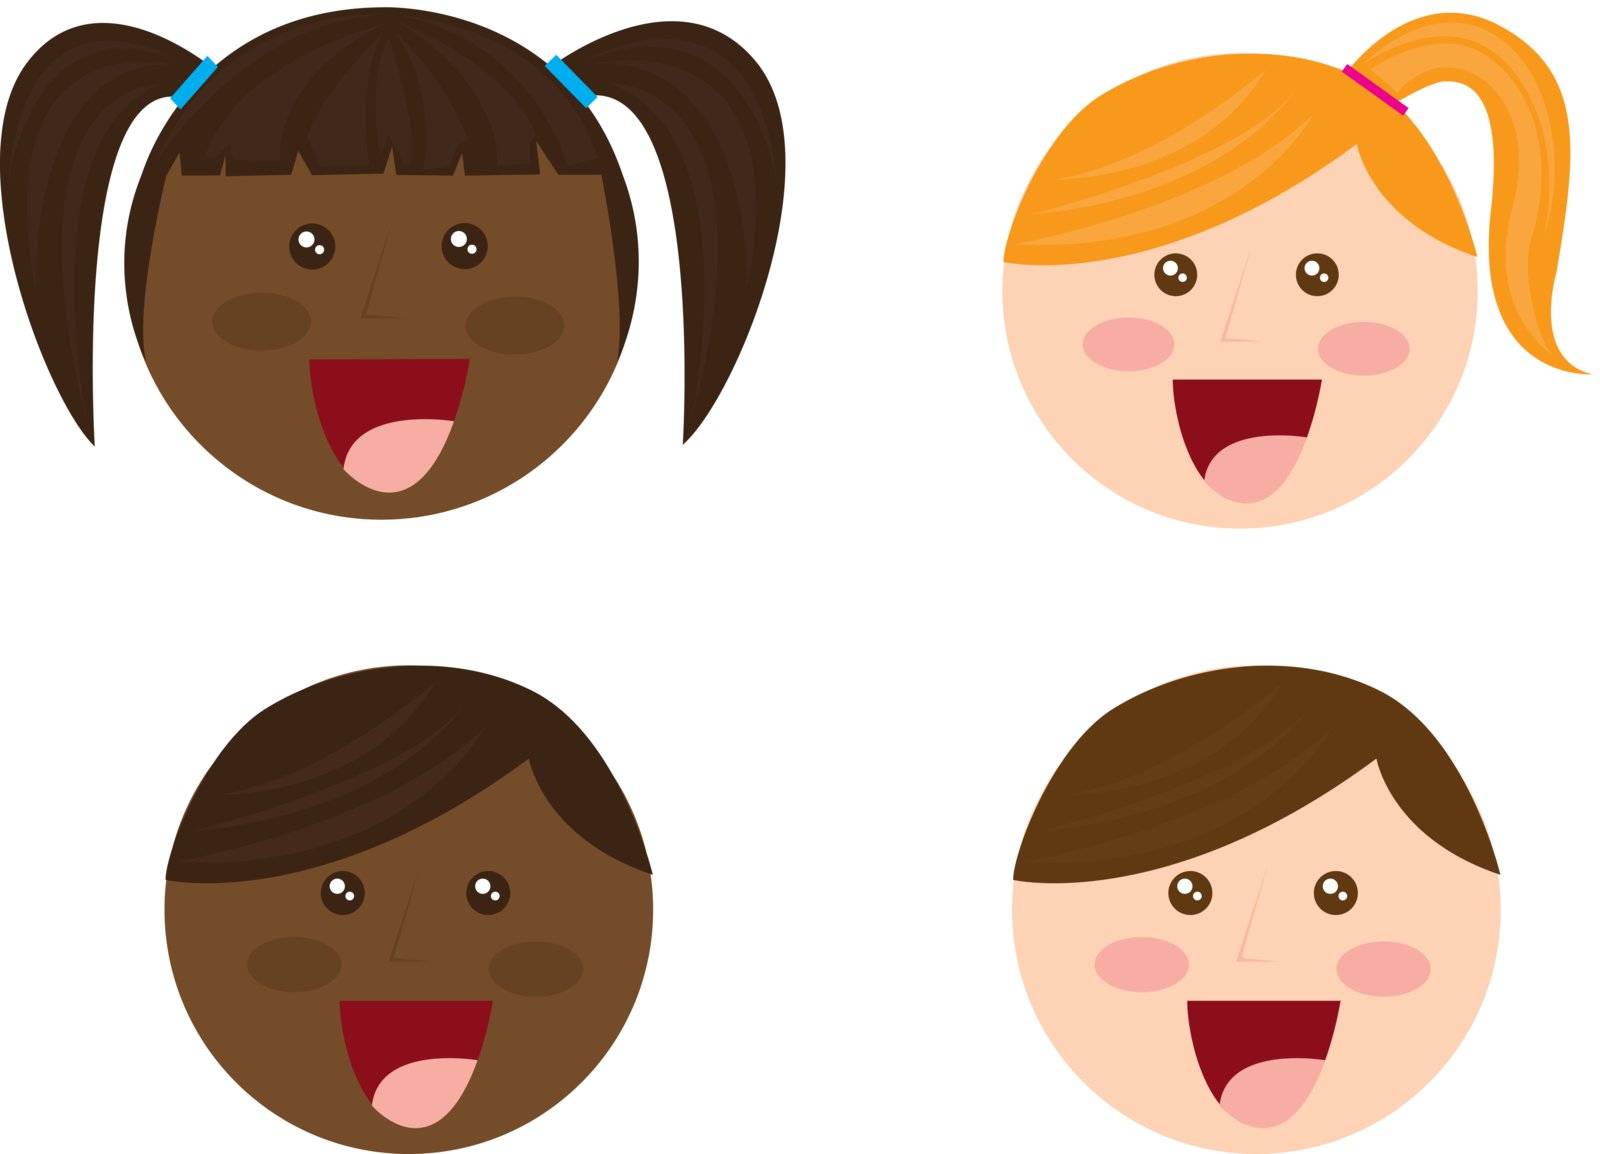 cute faces child cartoons over white background. vector